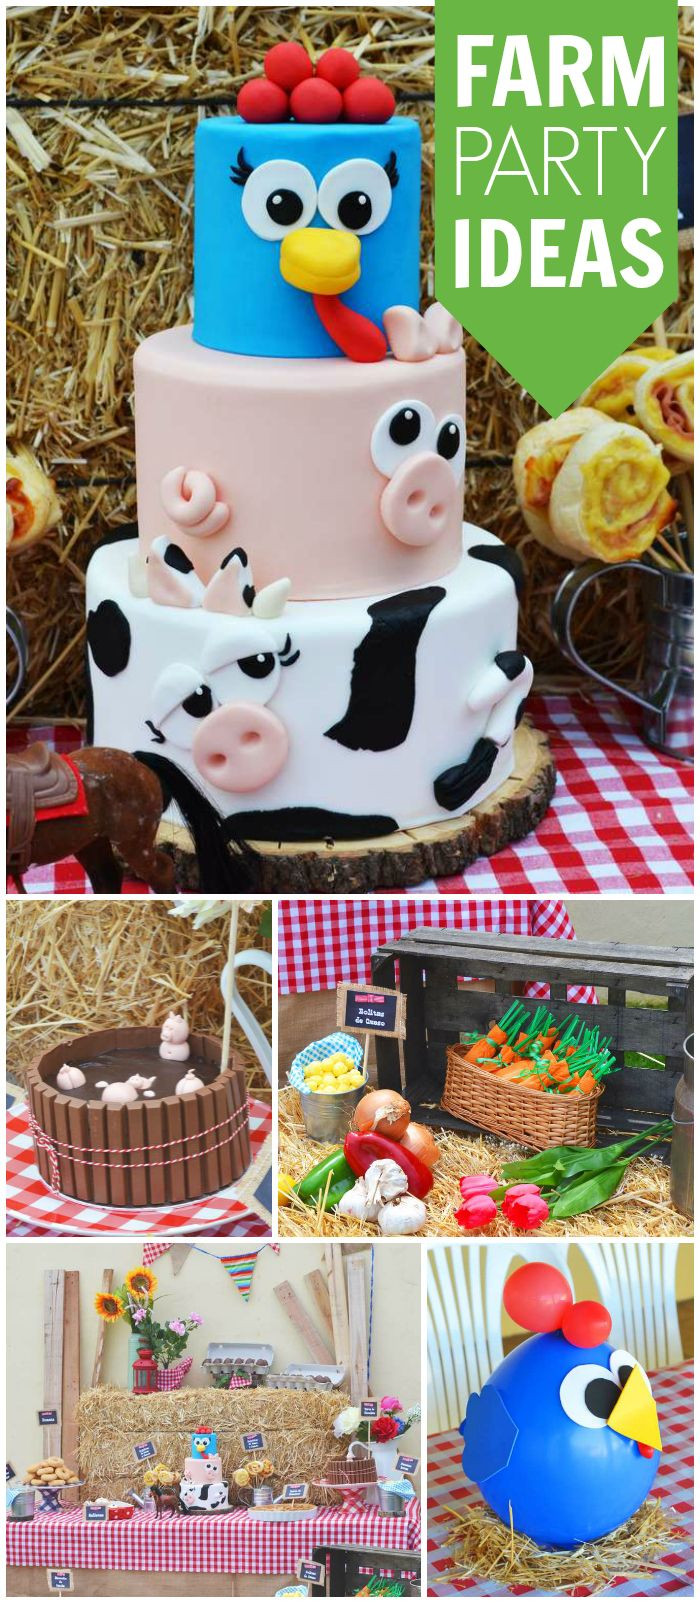 Farm Animals Birthday Party
 Isn t this farm party a great idea for a toddler birthday